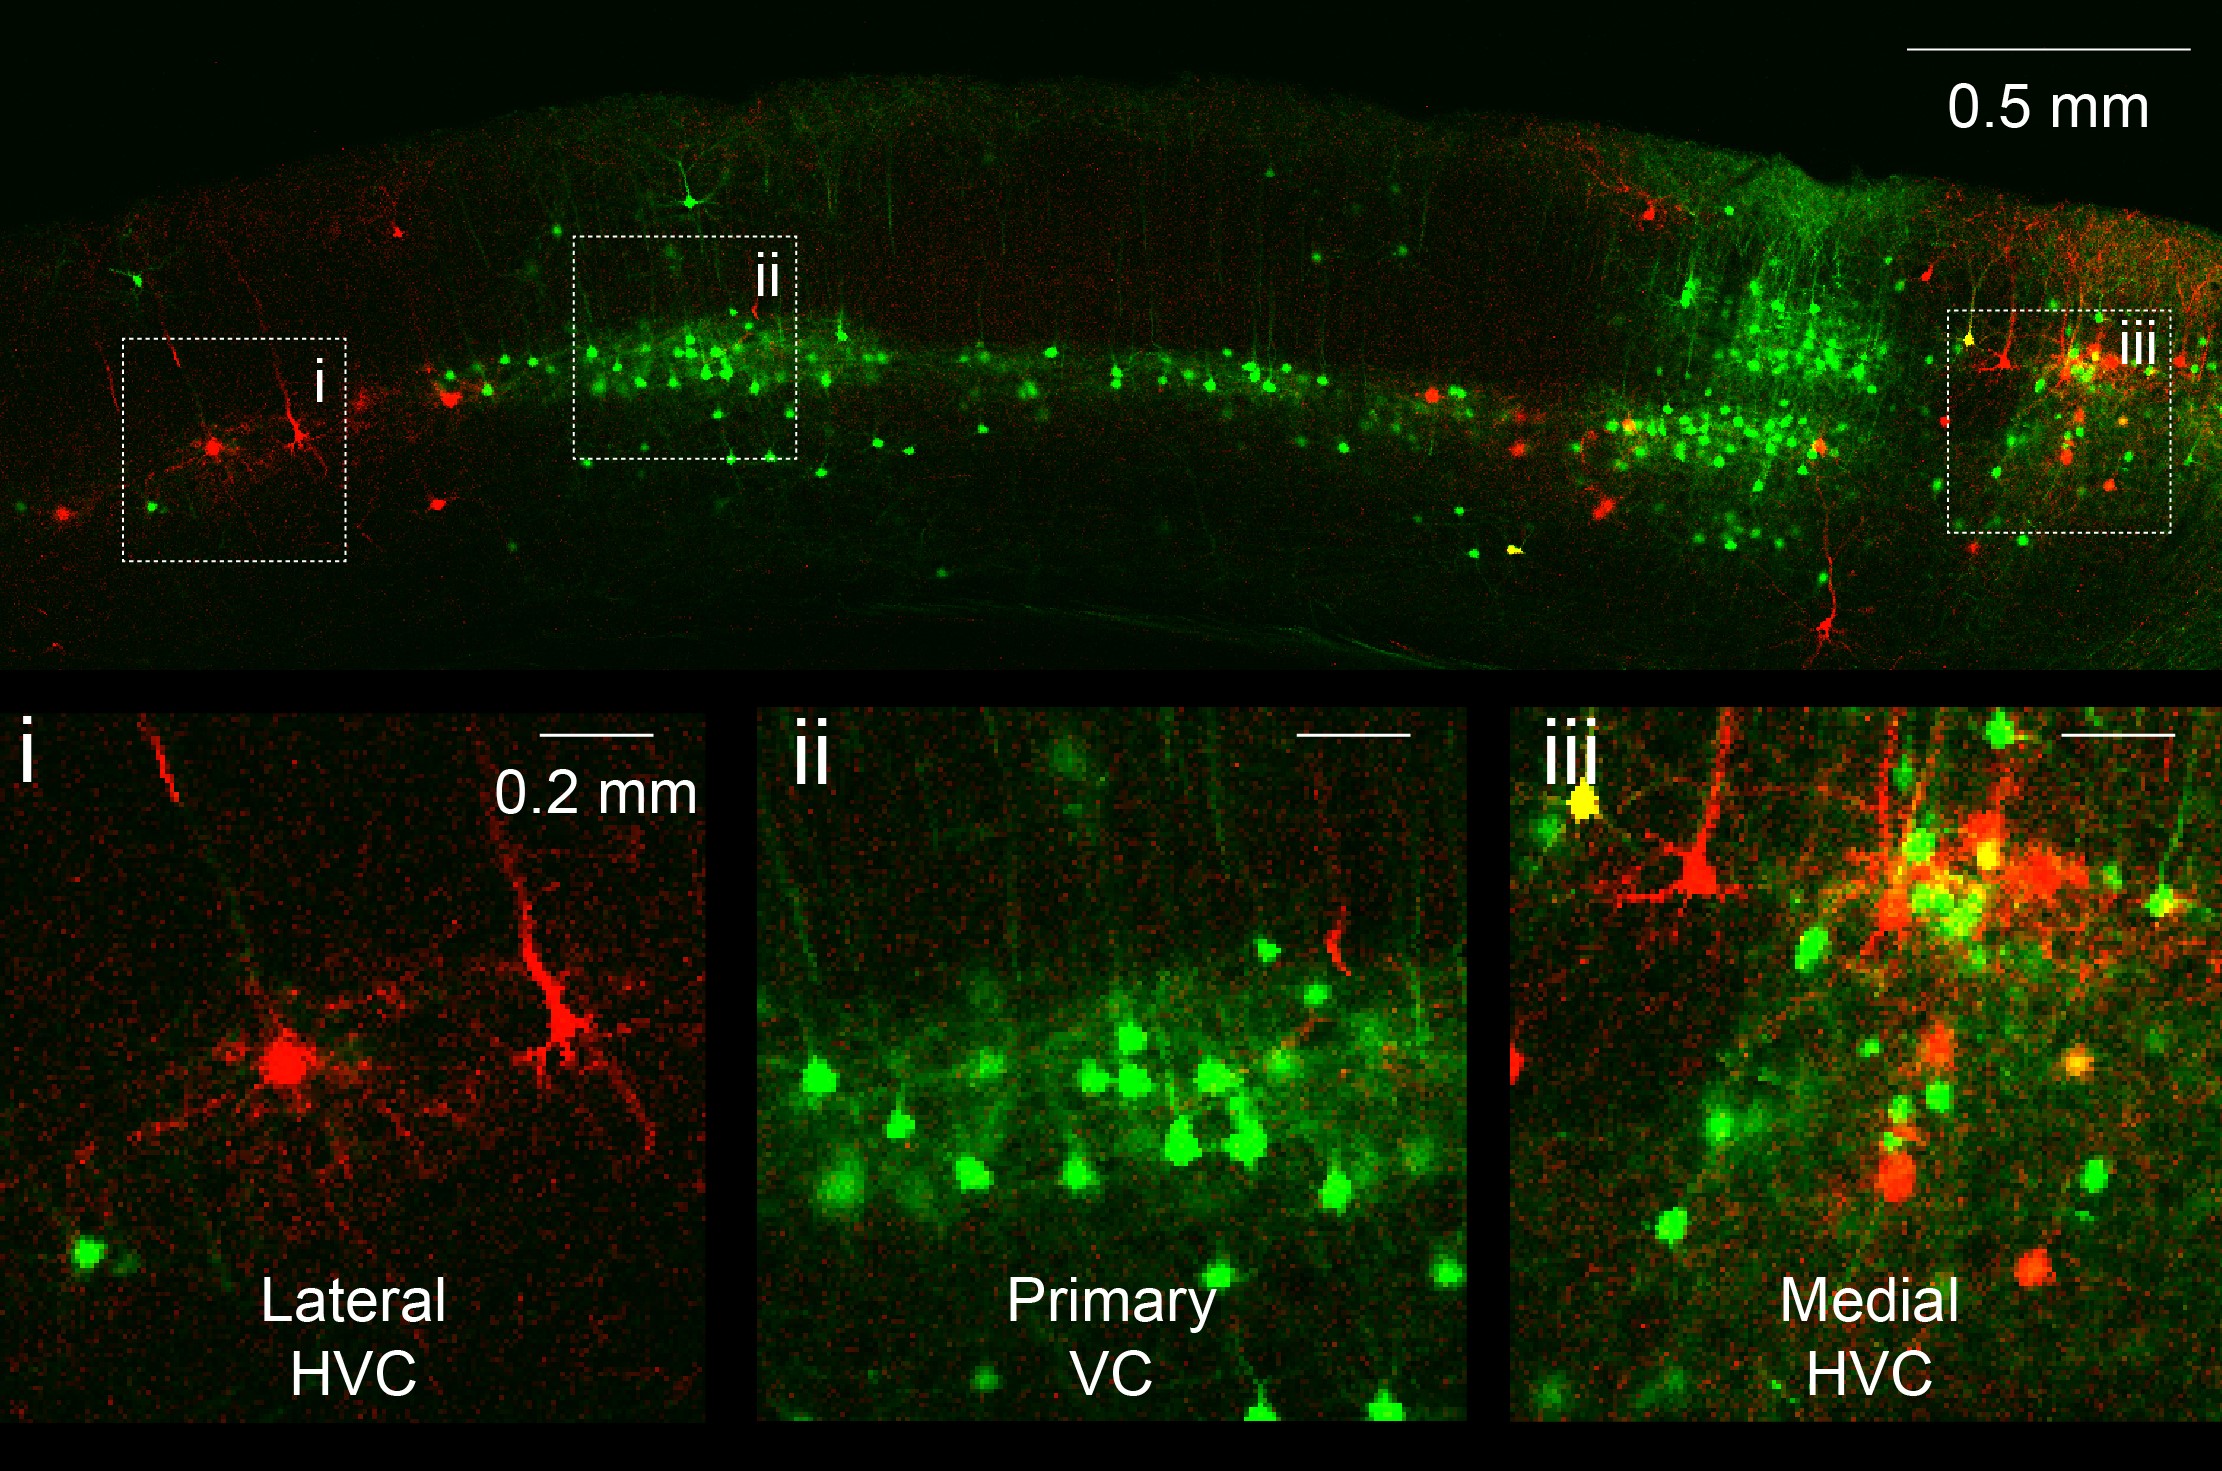 Sections of brain with green stained neurons shown at different magnifications